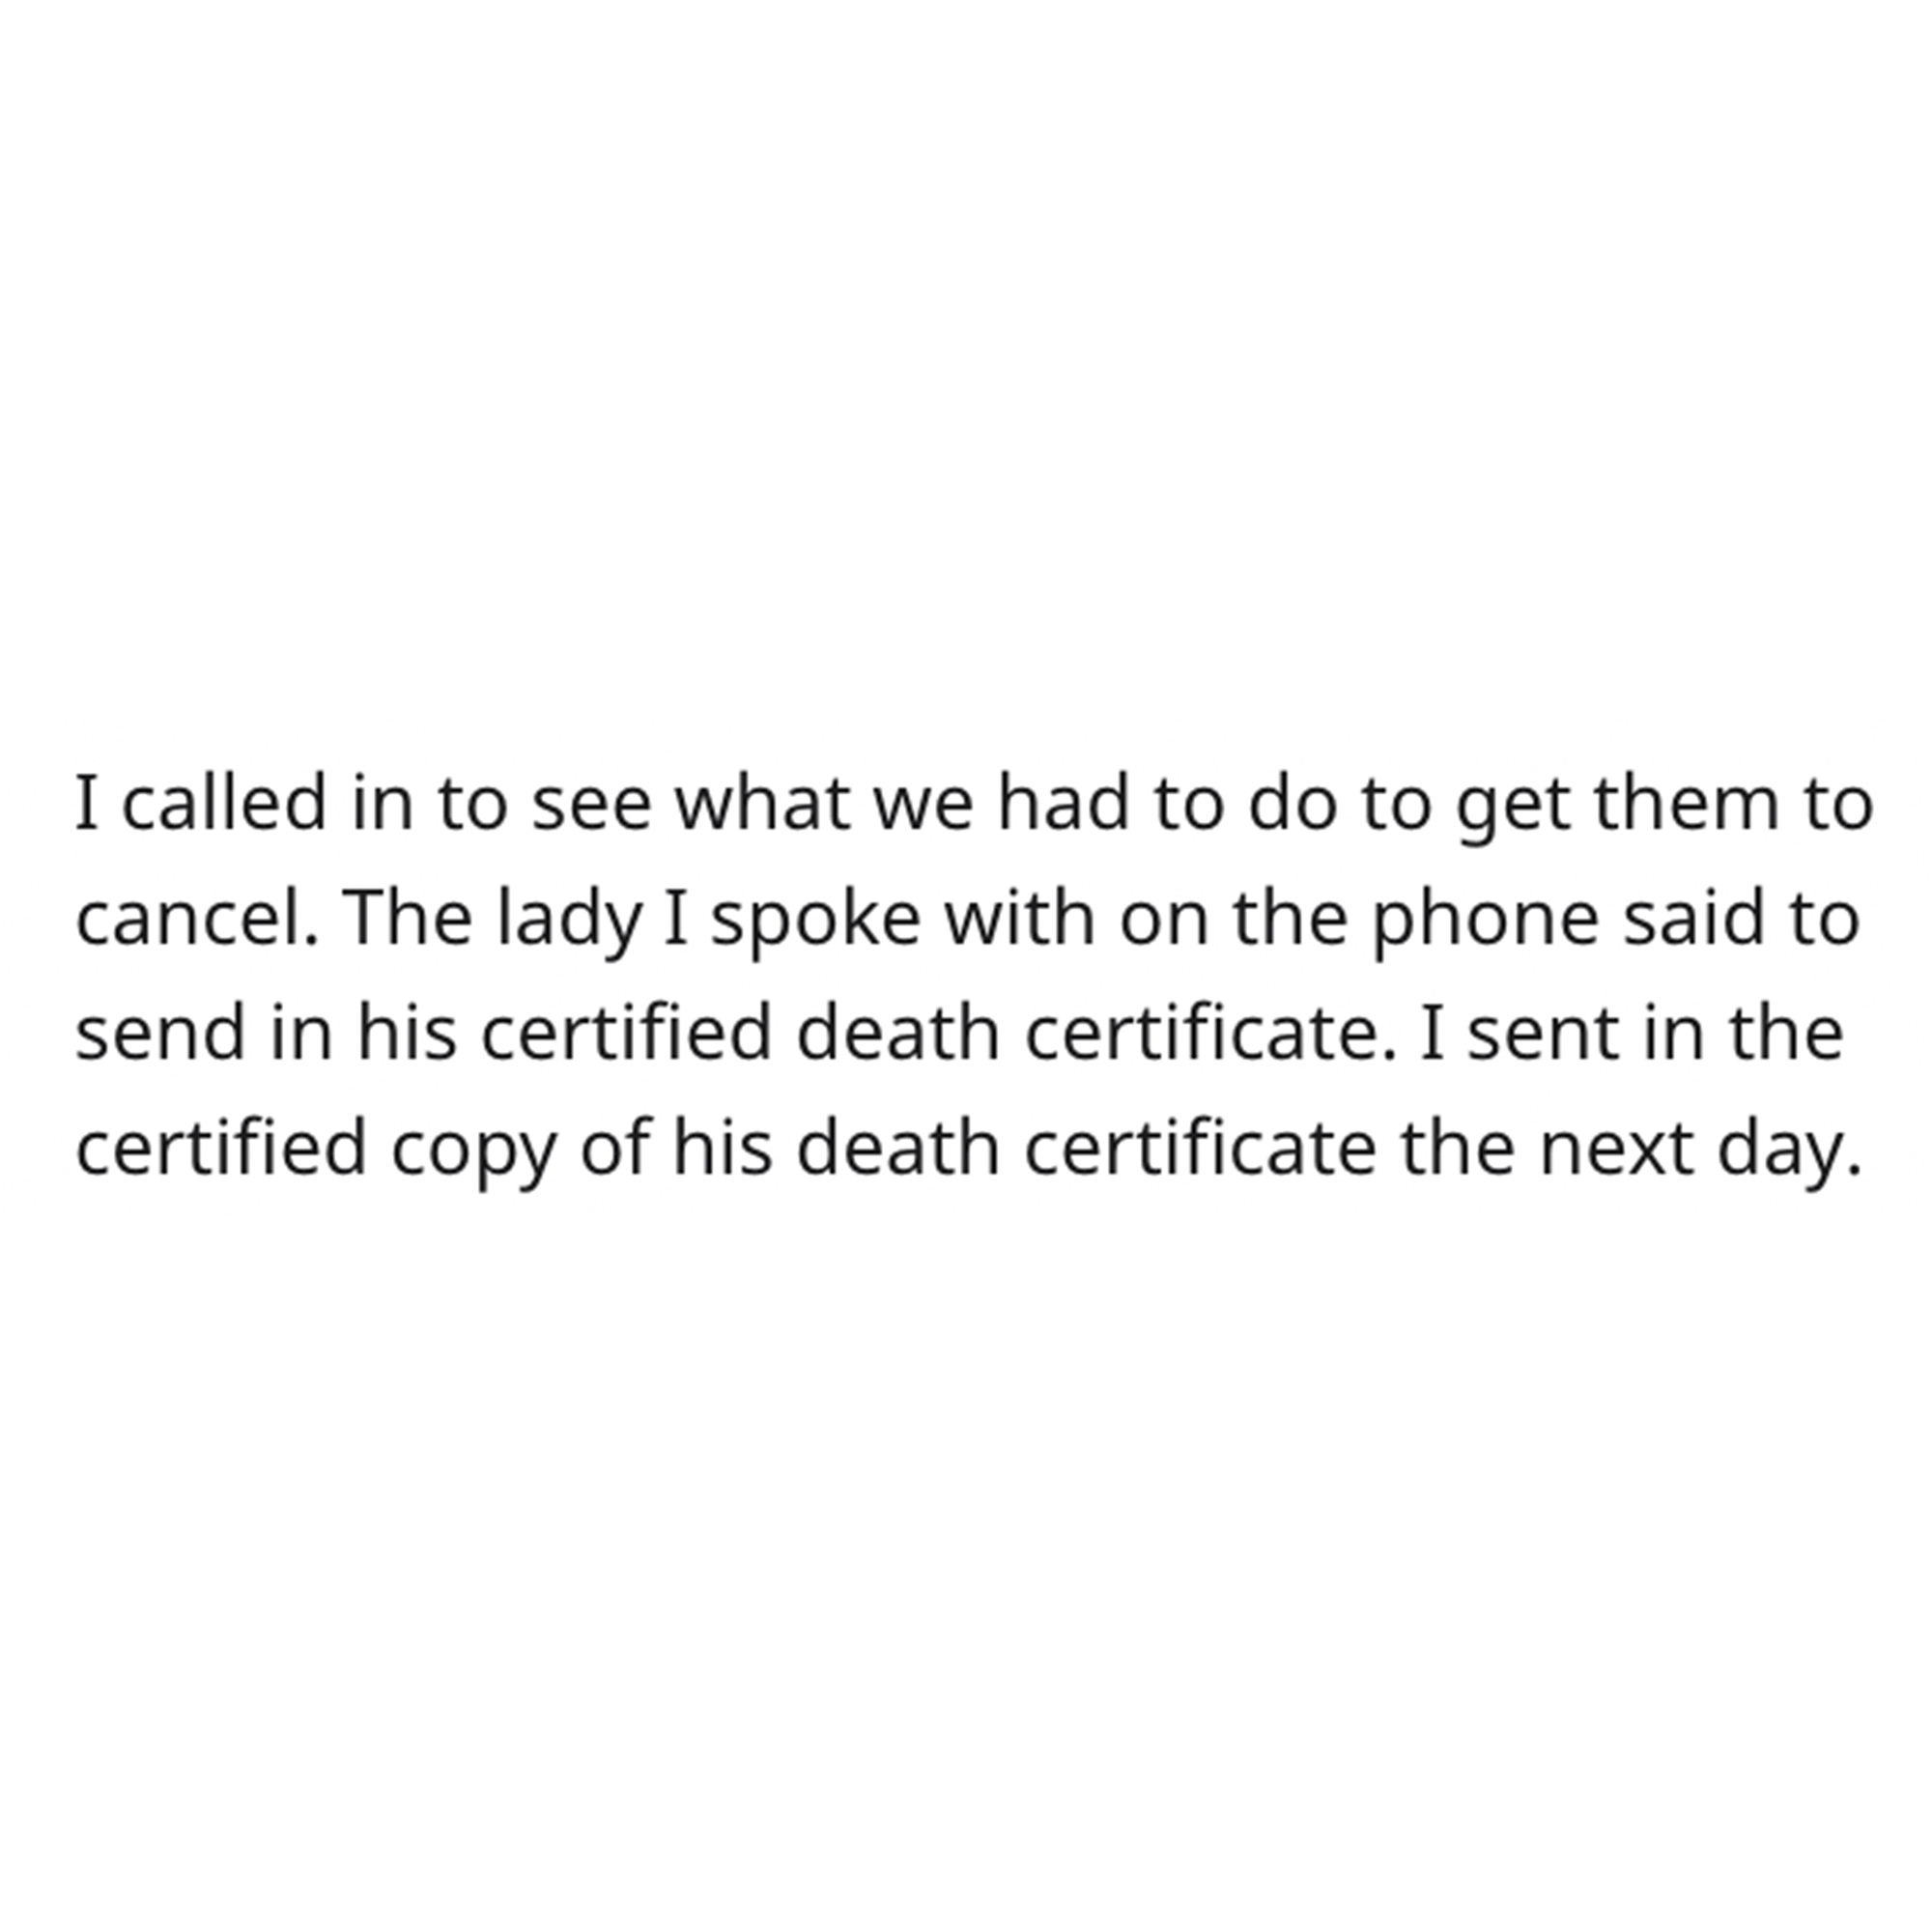 Dead Dad revenge story - lovesick quotes - I called in to see what we had to do to get them to cancel. The lady I spoke with on the phone said to send in his certified death certificate. I sent in the certified copy of his death certificate the next day.